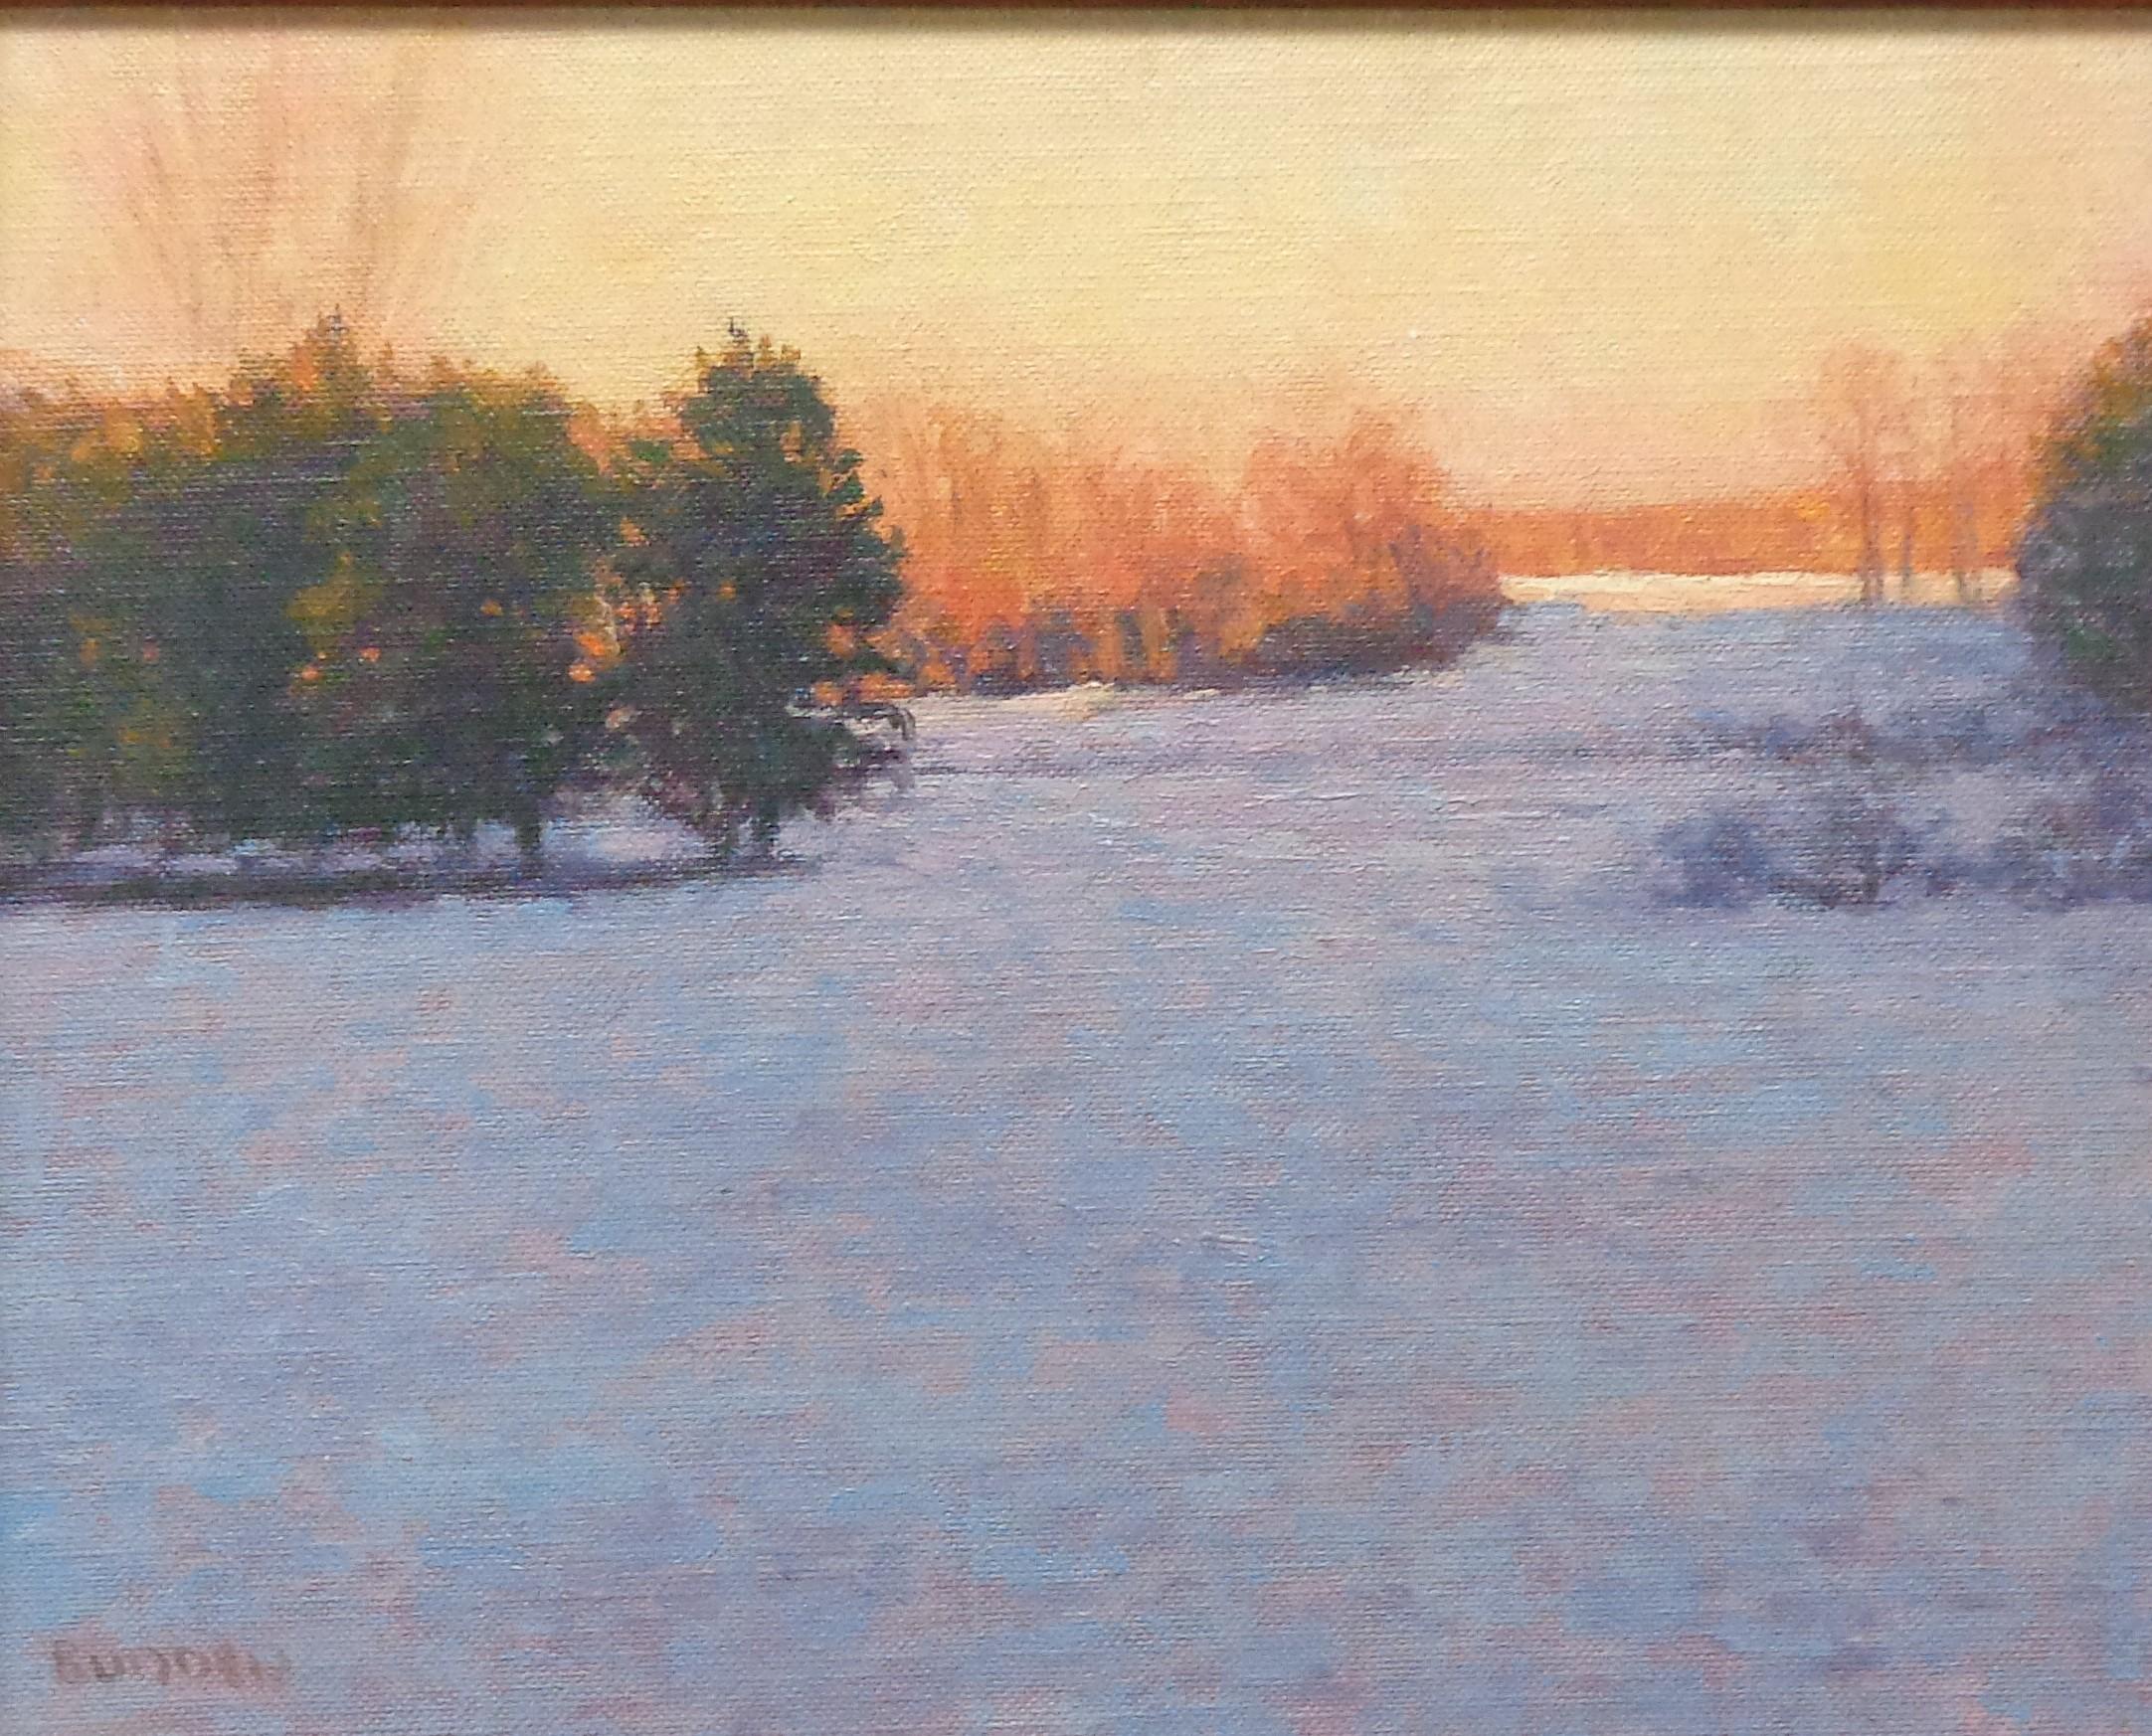  Impressionistic Winter Snow Landscape Oil Painting Michael Budden Evening Light For Sale 1